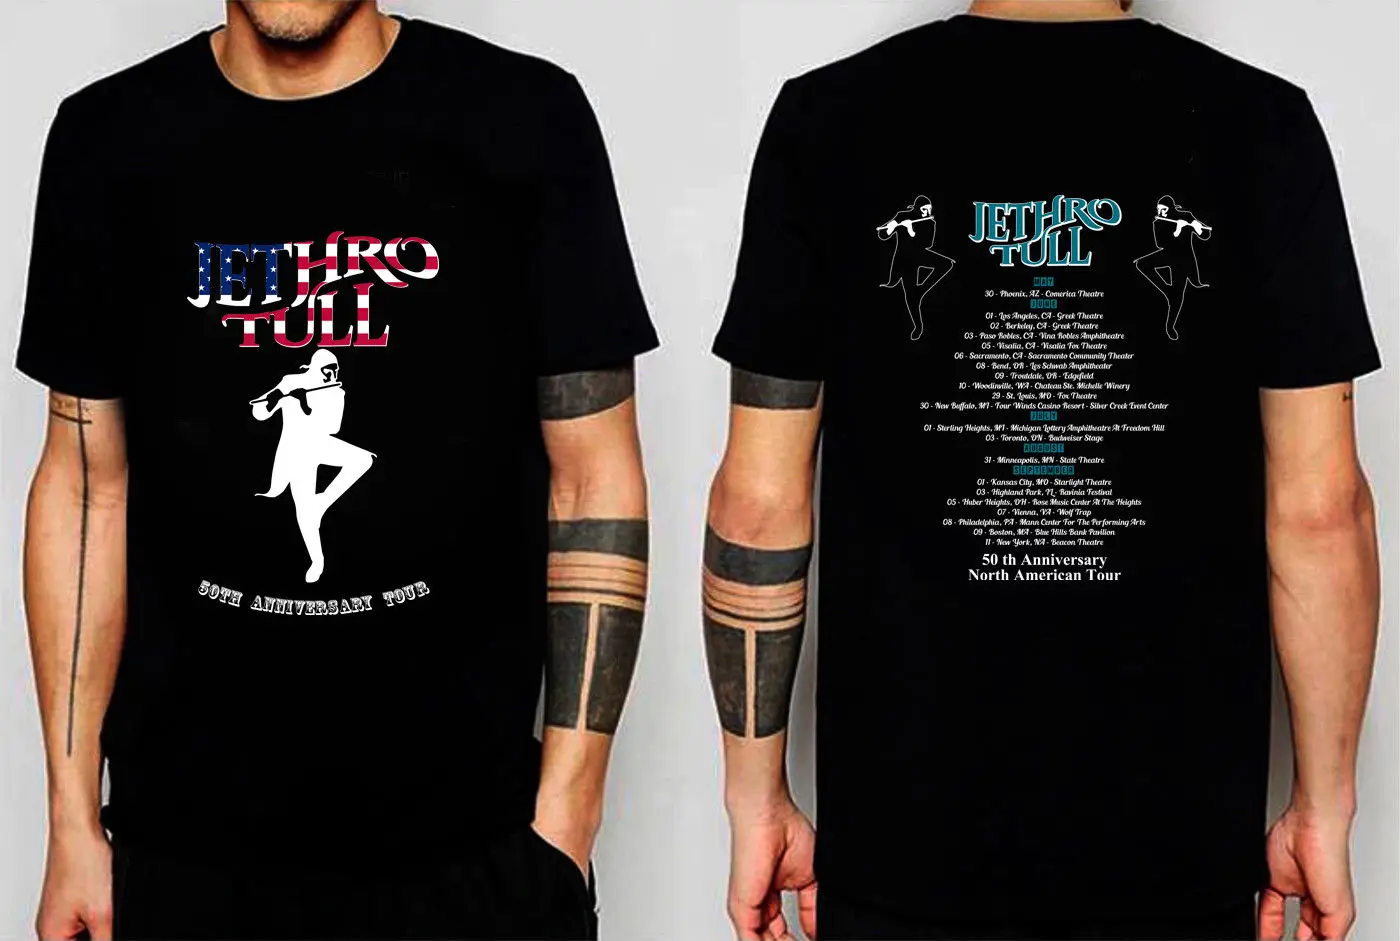 

New Jethro Tull 2018 50th Anniversary Tour Concert Black T-Shirt Size S To 3XL Funny Clothing Casual Short Sleeve T Shirts